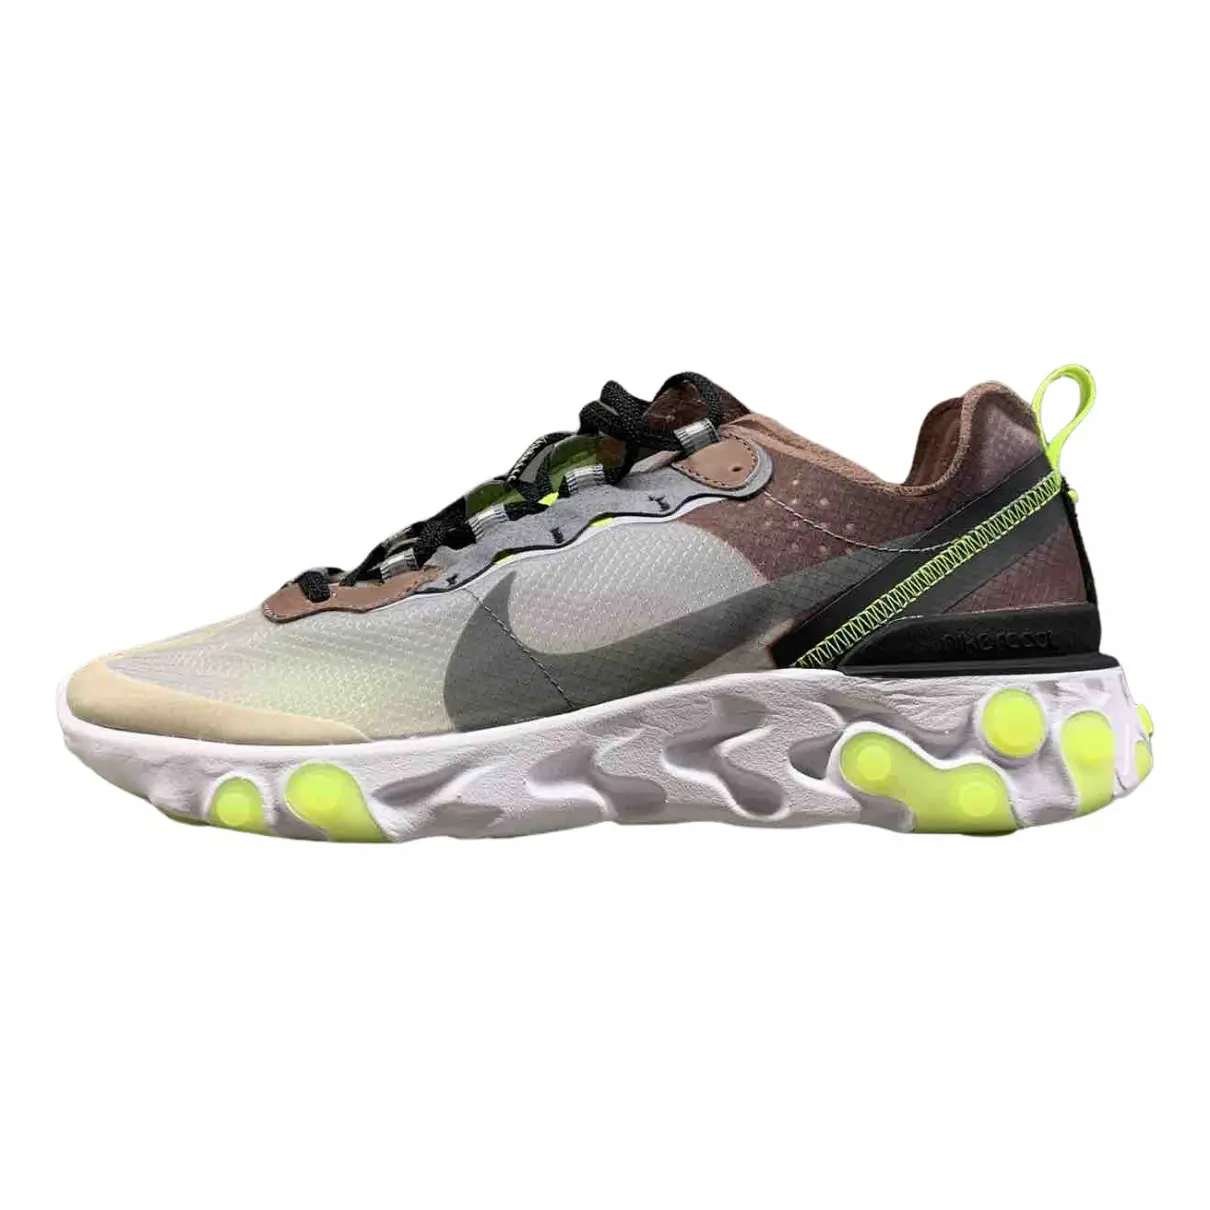 React Element 87  low trainers Nike